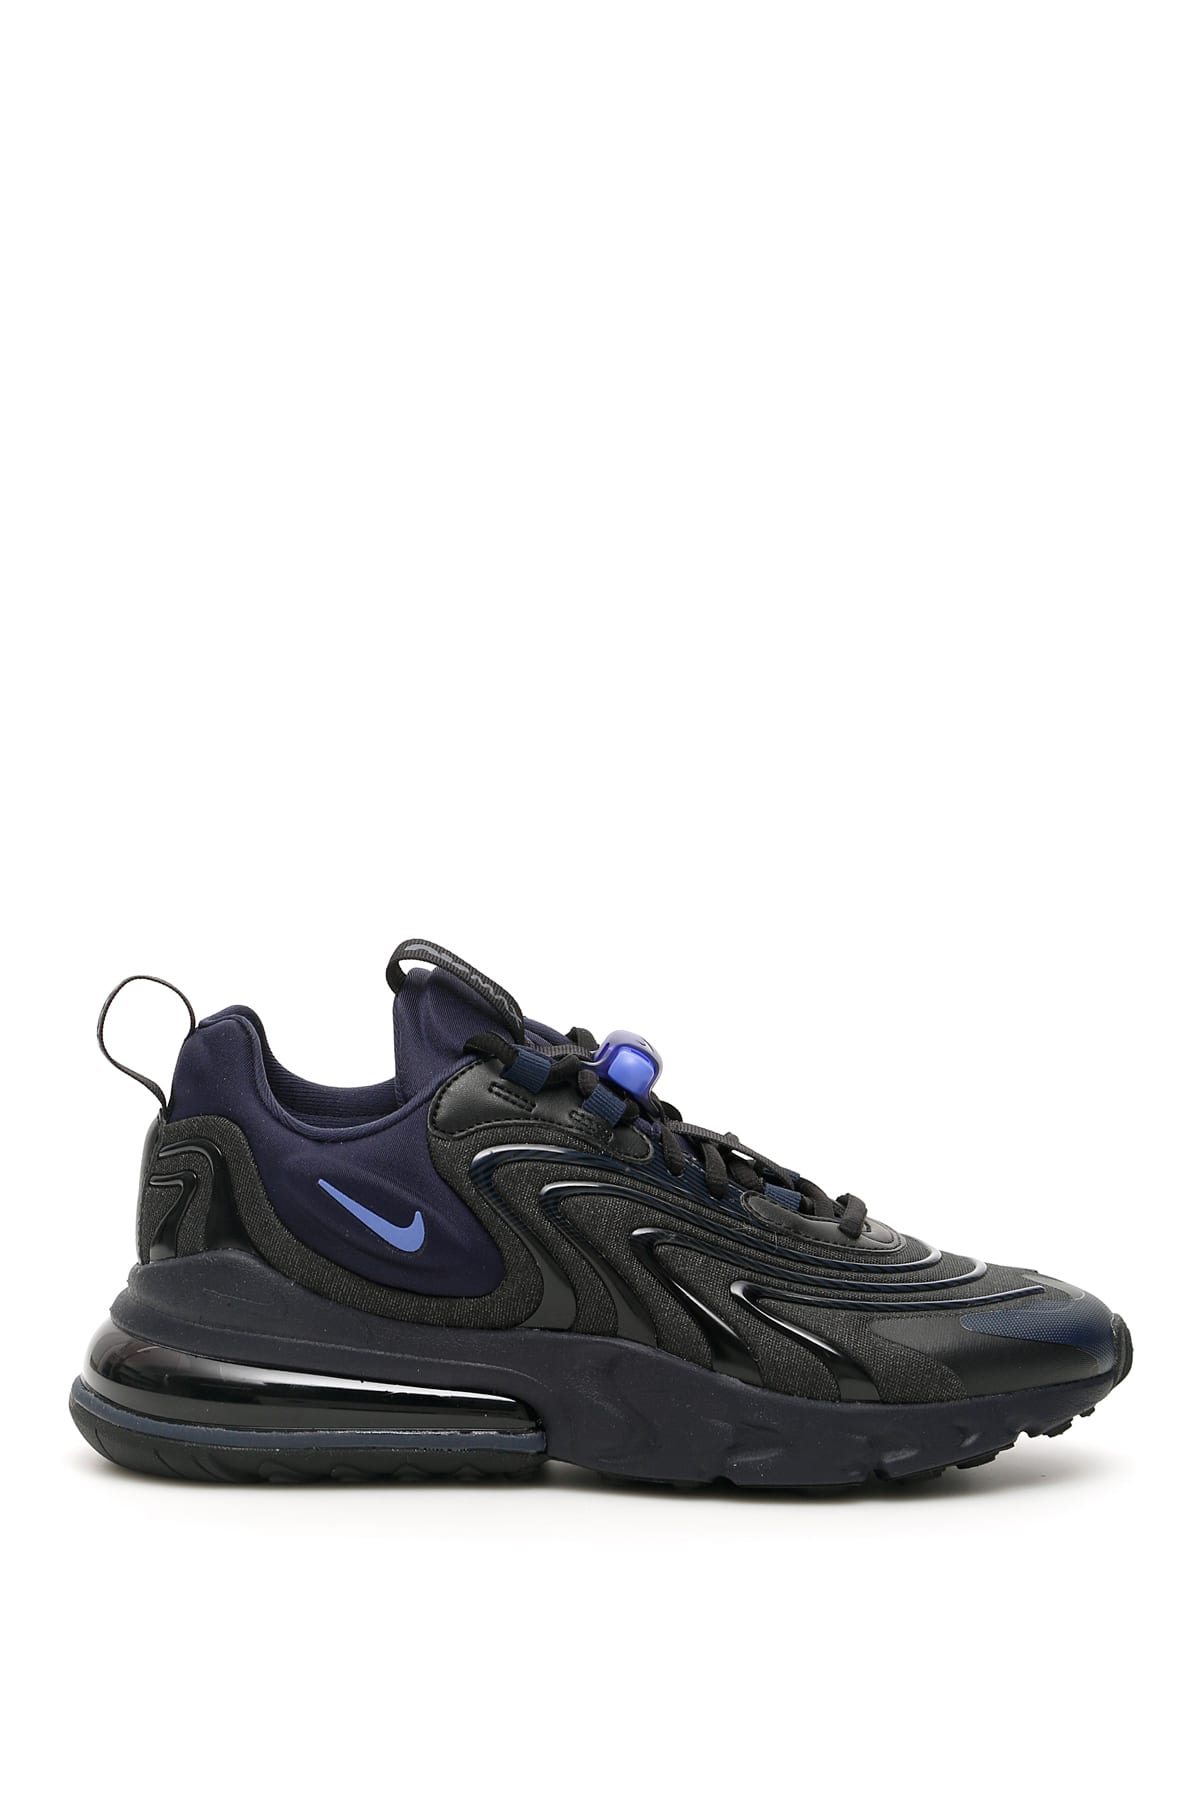 NIKE AIR MAX 270 REACT ENG trainers,11269870